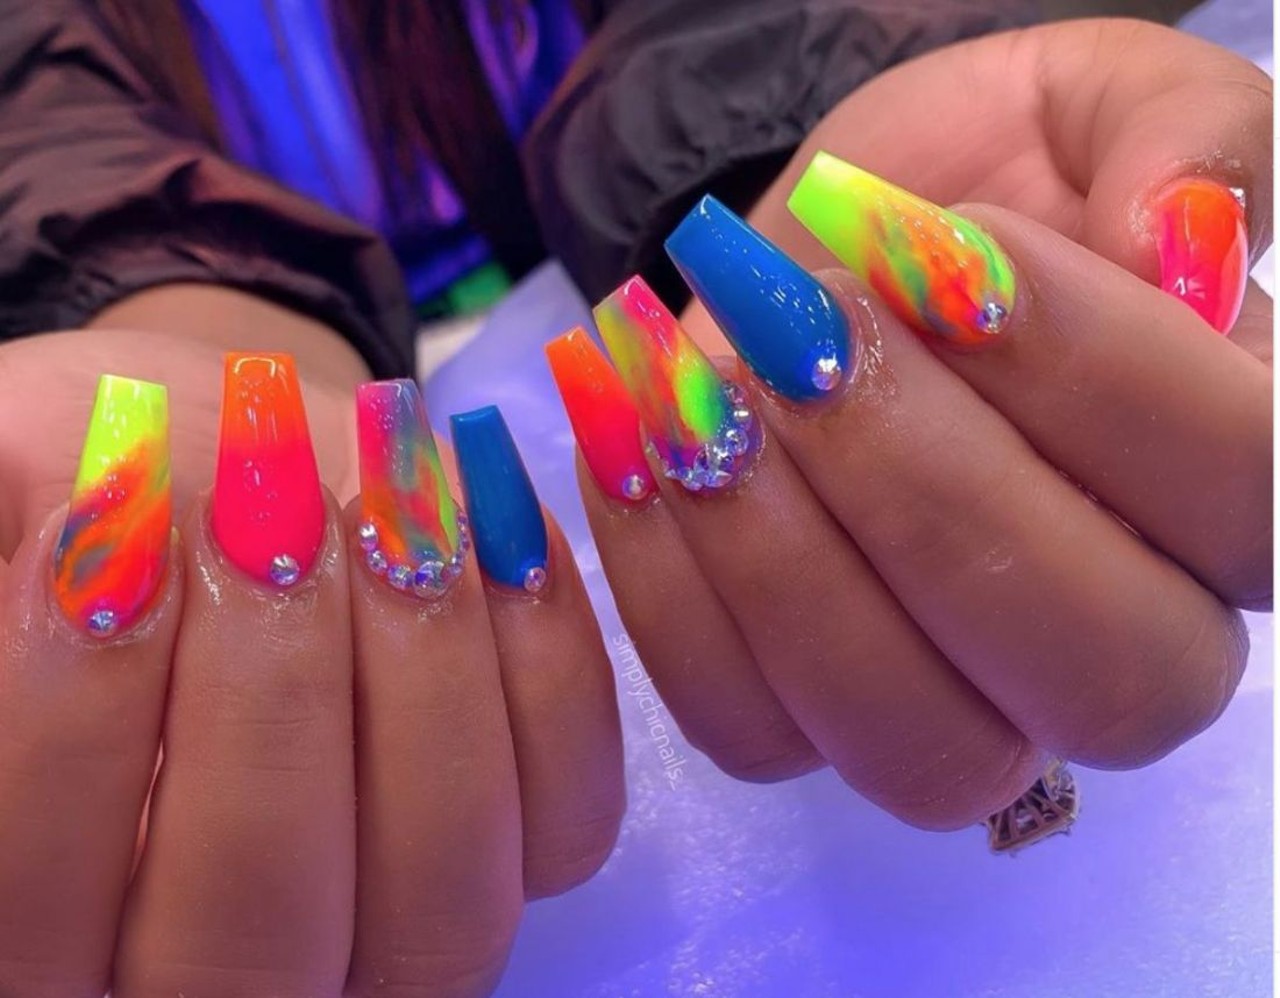 Simply Chic Nails
@simplychicnails_
11 mile & Ryan in Warren
Pricilla offers acrylic sets and starts at medium-long length. Most of her beautiful work on her Instagram comes from clients allowing her to do &#147;whatever.&#148; 
Photo via  Simply Chic Nails / Instagram 